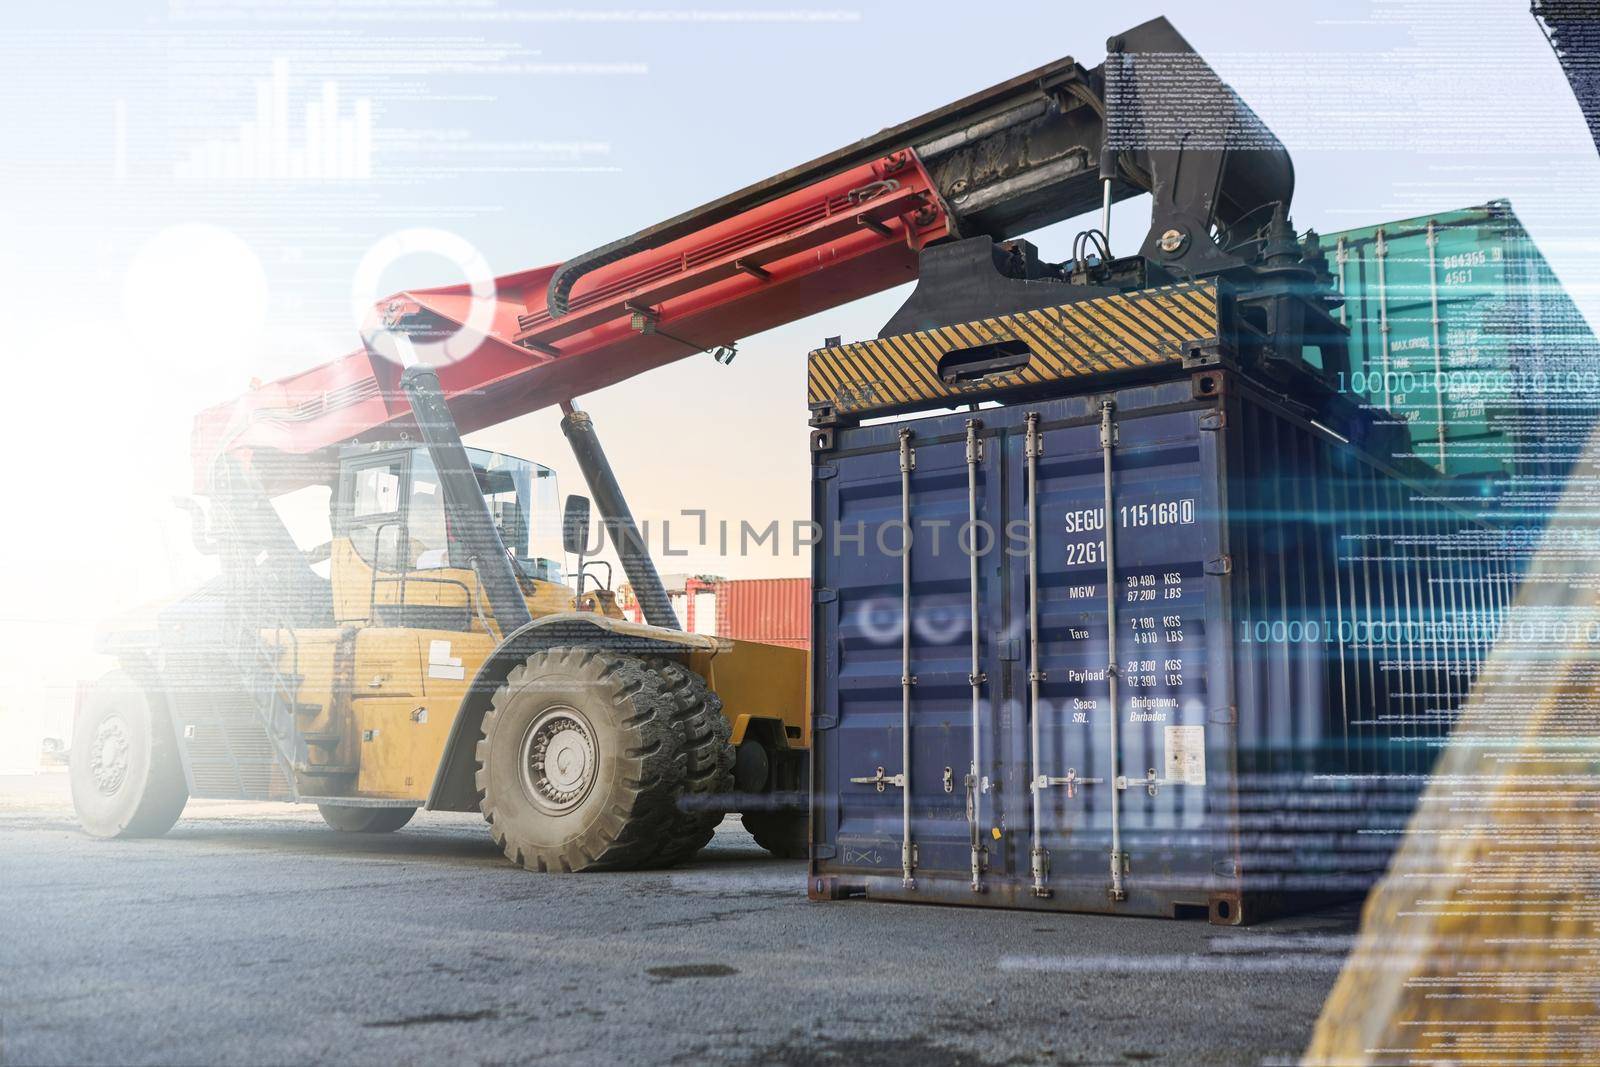 Shipping, supply chain and logistics with a container crane in a yard for storage, freight or cargo distribution and delivery. Stock, industry and ecommerce with retail transport outdoor with overlay.